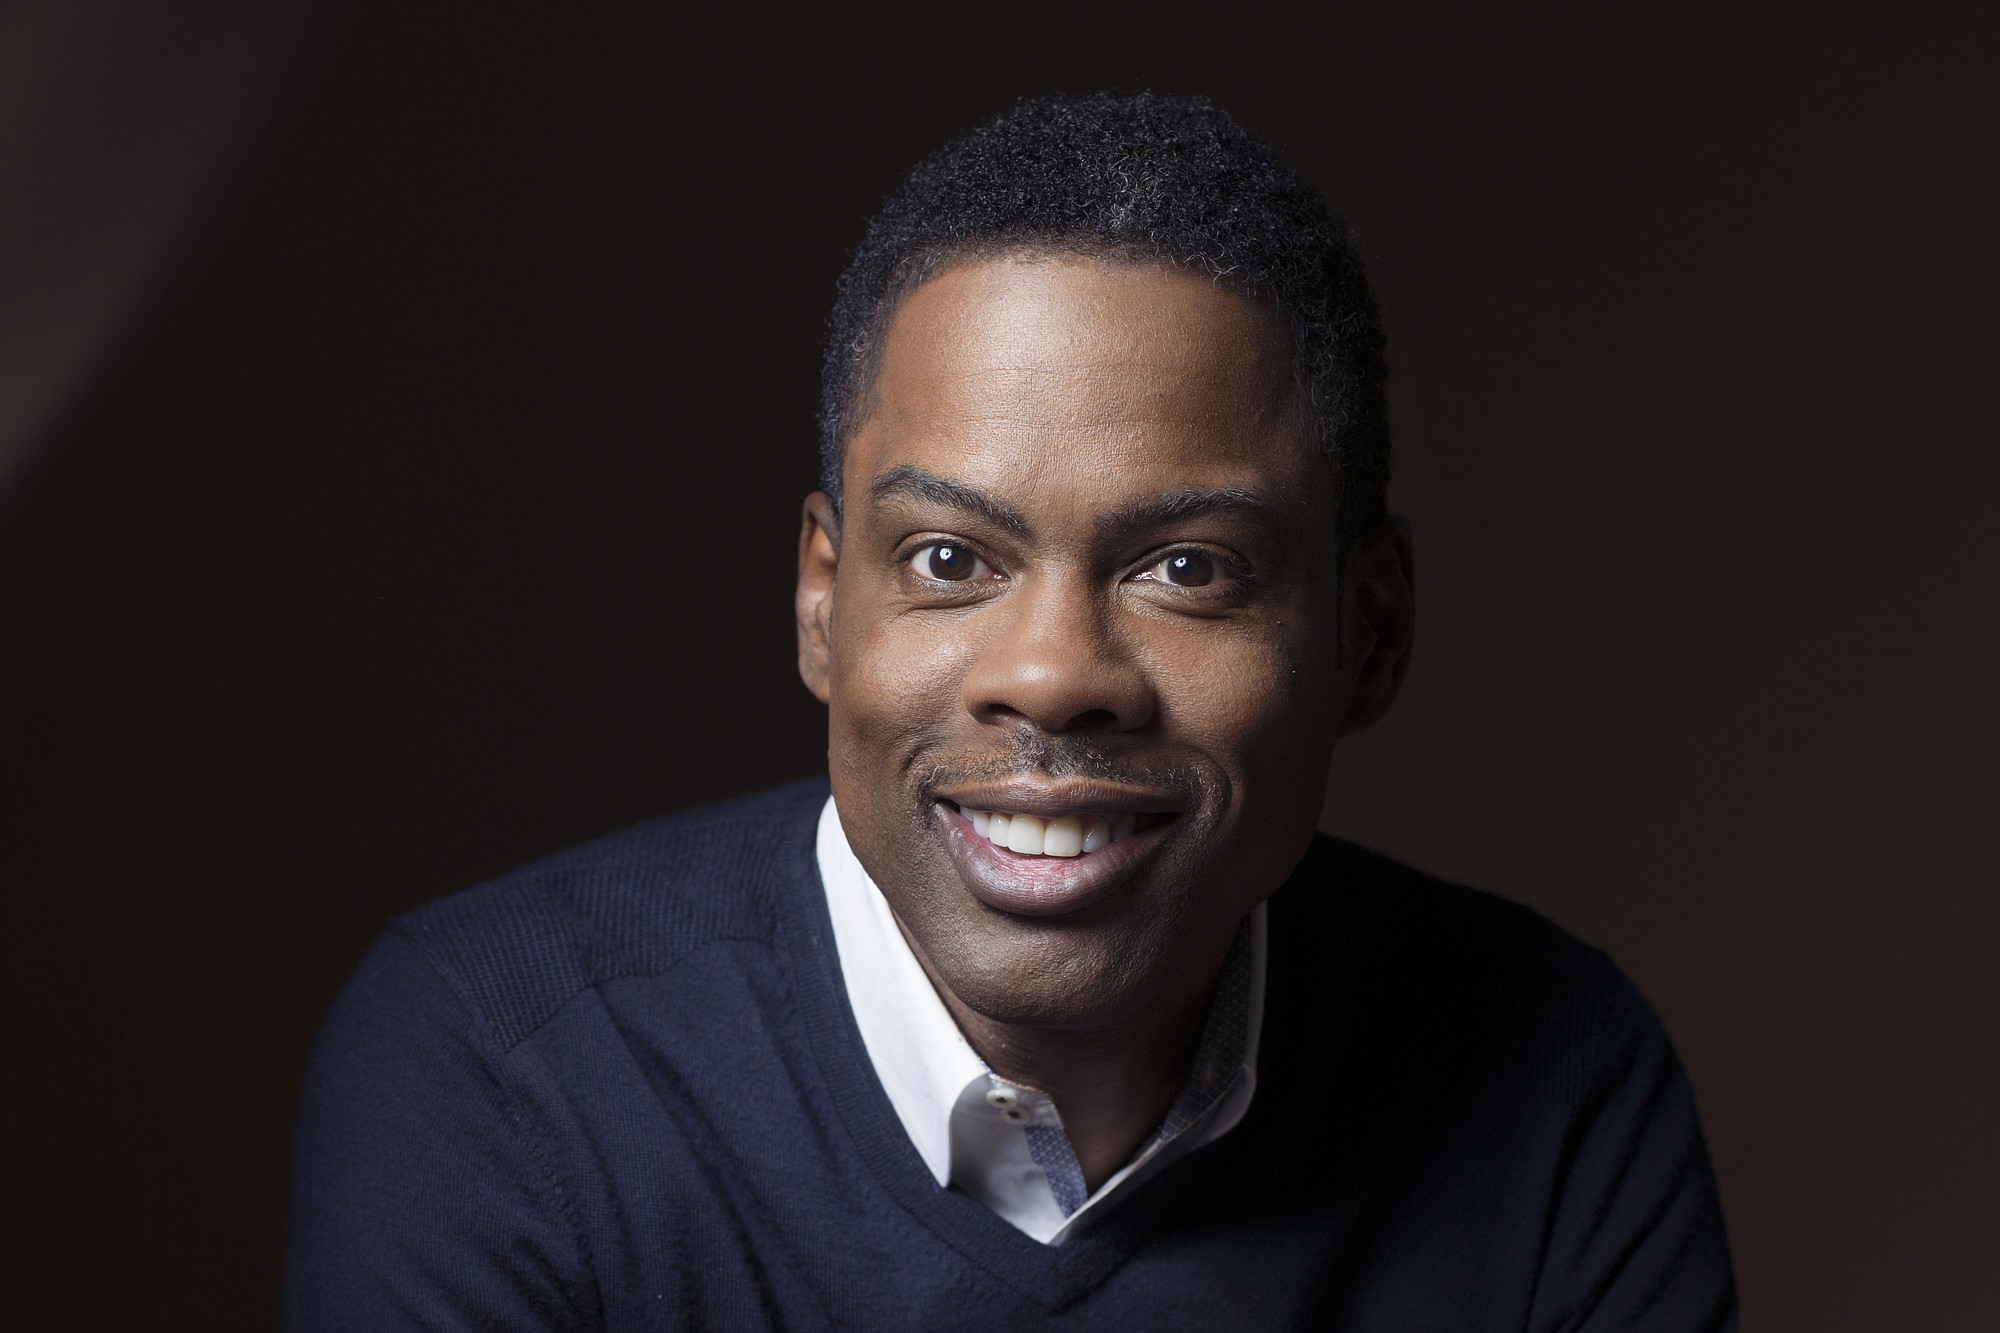 Comedian and actor Chris Rock has appeared in the films &quot;Grown Ups 2&quot; and &quot;Lethal Weapon 4,&quot; voiced Marty in the &quot;Madagascar&quot; movies and has produced several TV series, including &quot;Everybody Hates Chris.&quot;